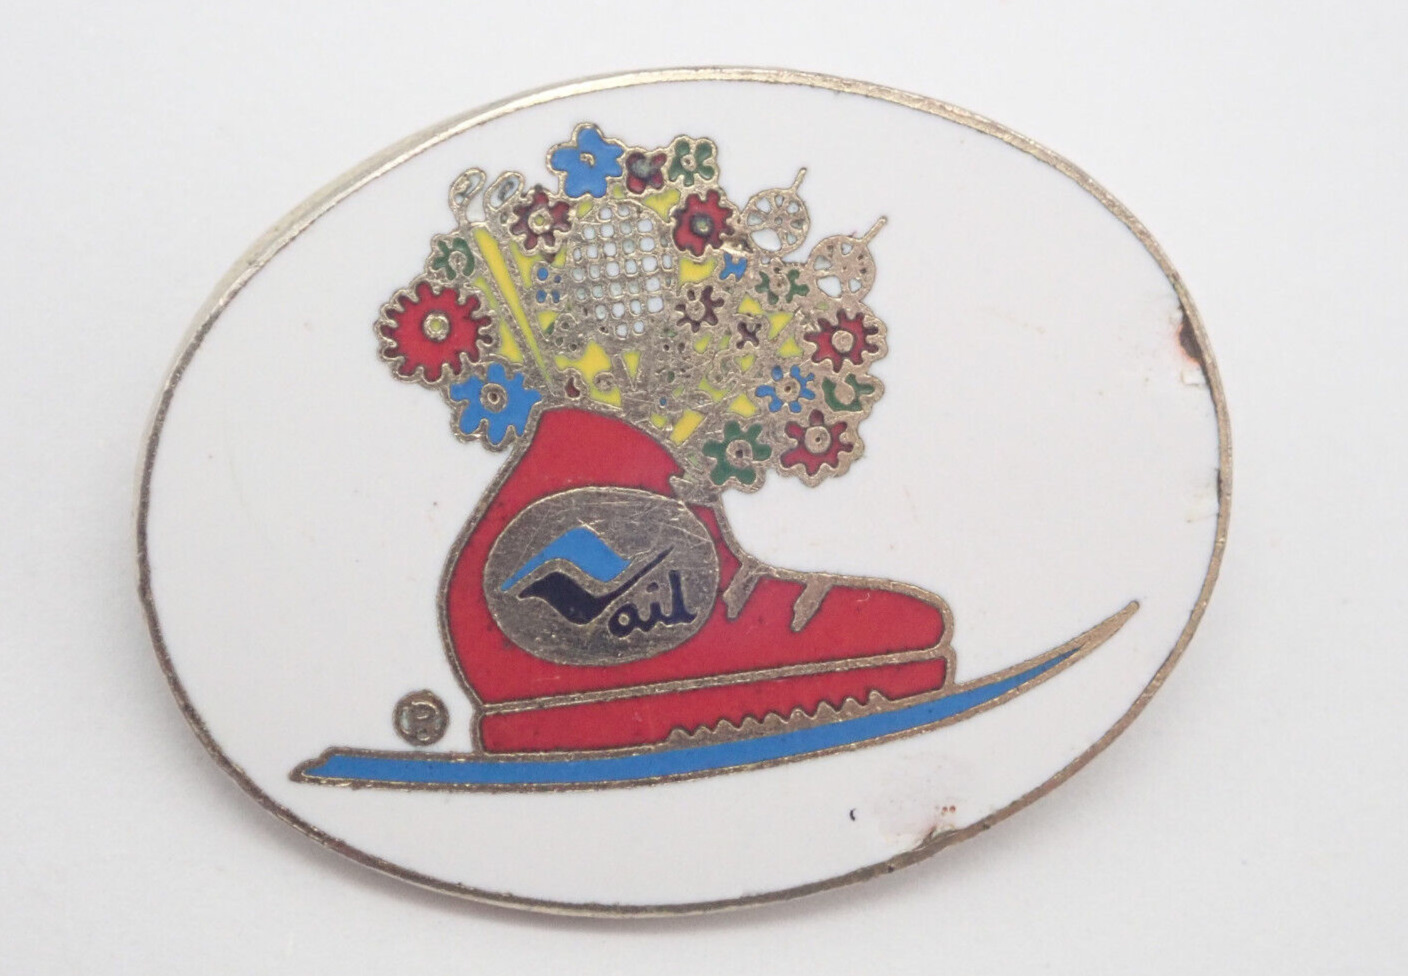 Vail Ski Boot with Flowers Vintage Lapel Pin